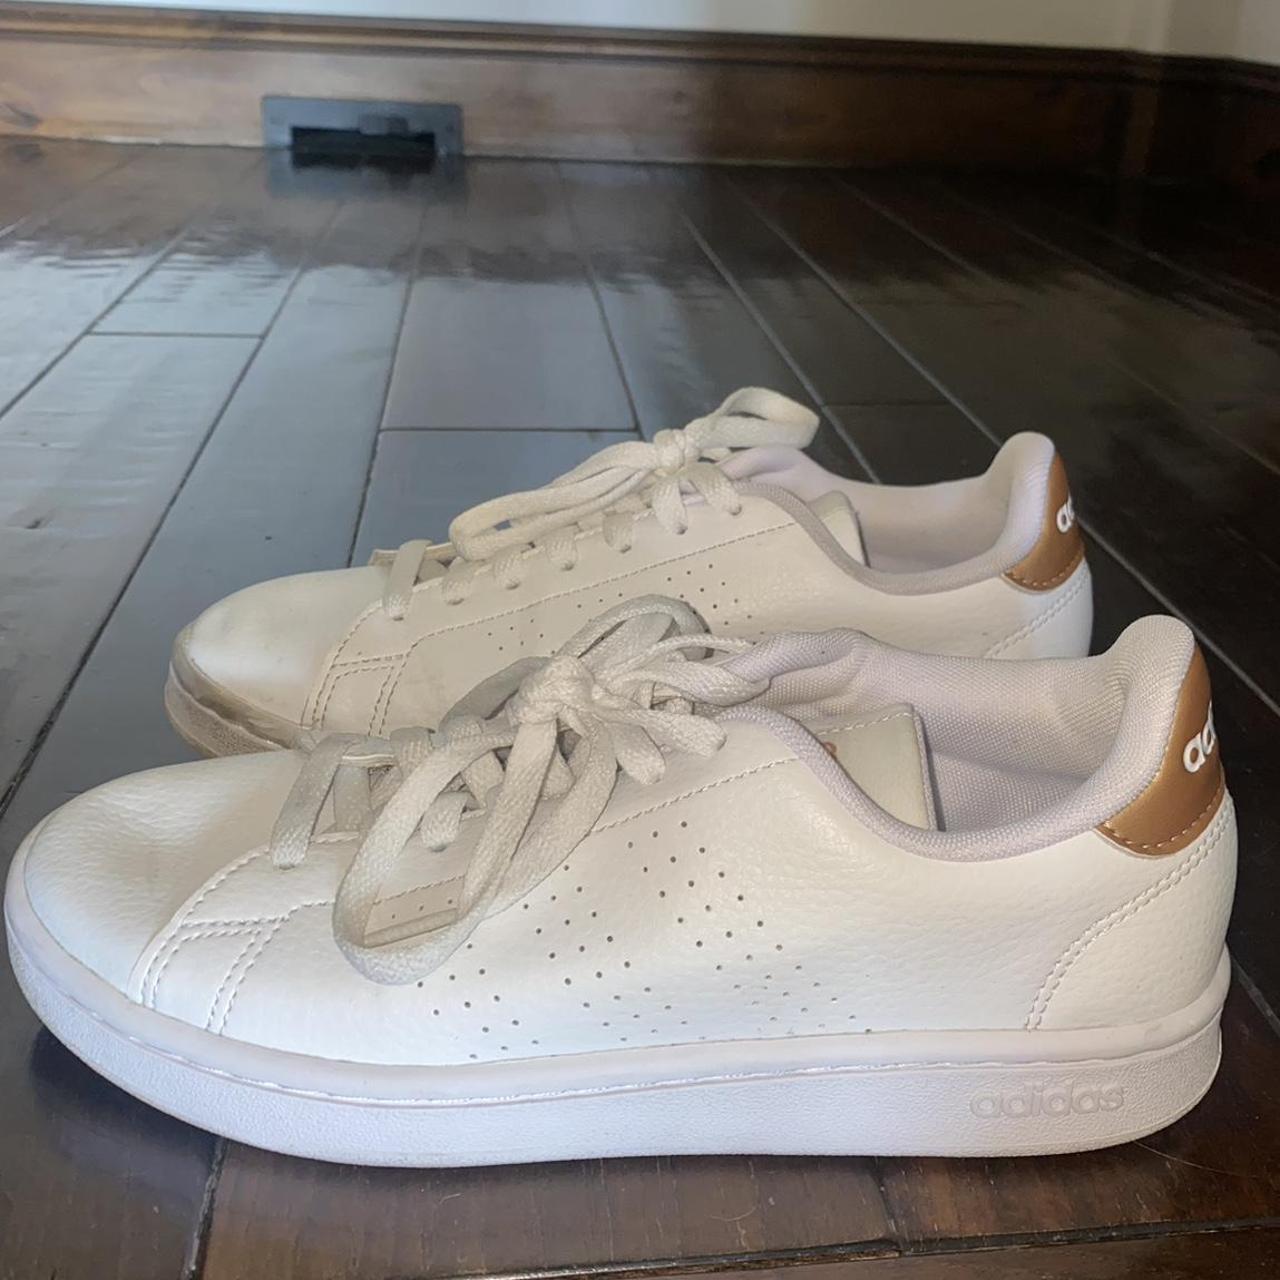 Adidas Women's White and Gold Trainers (3)